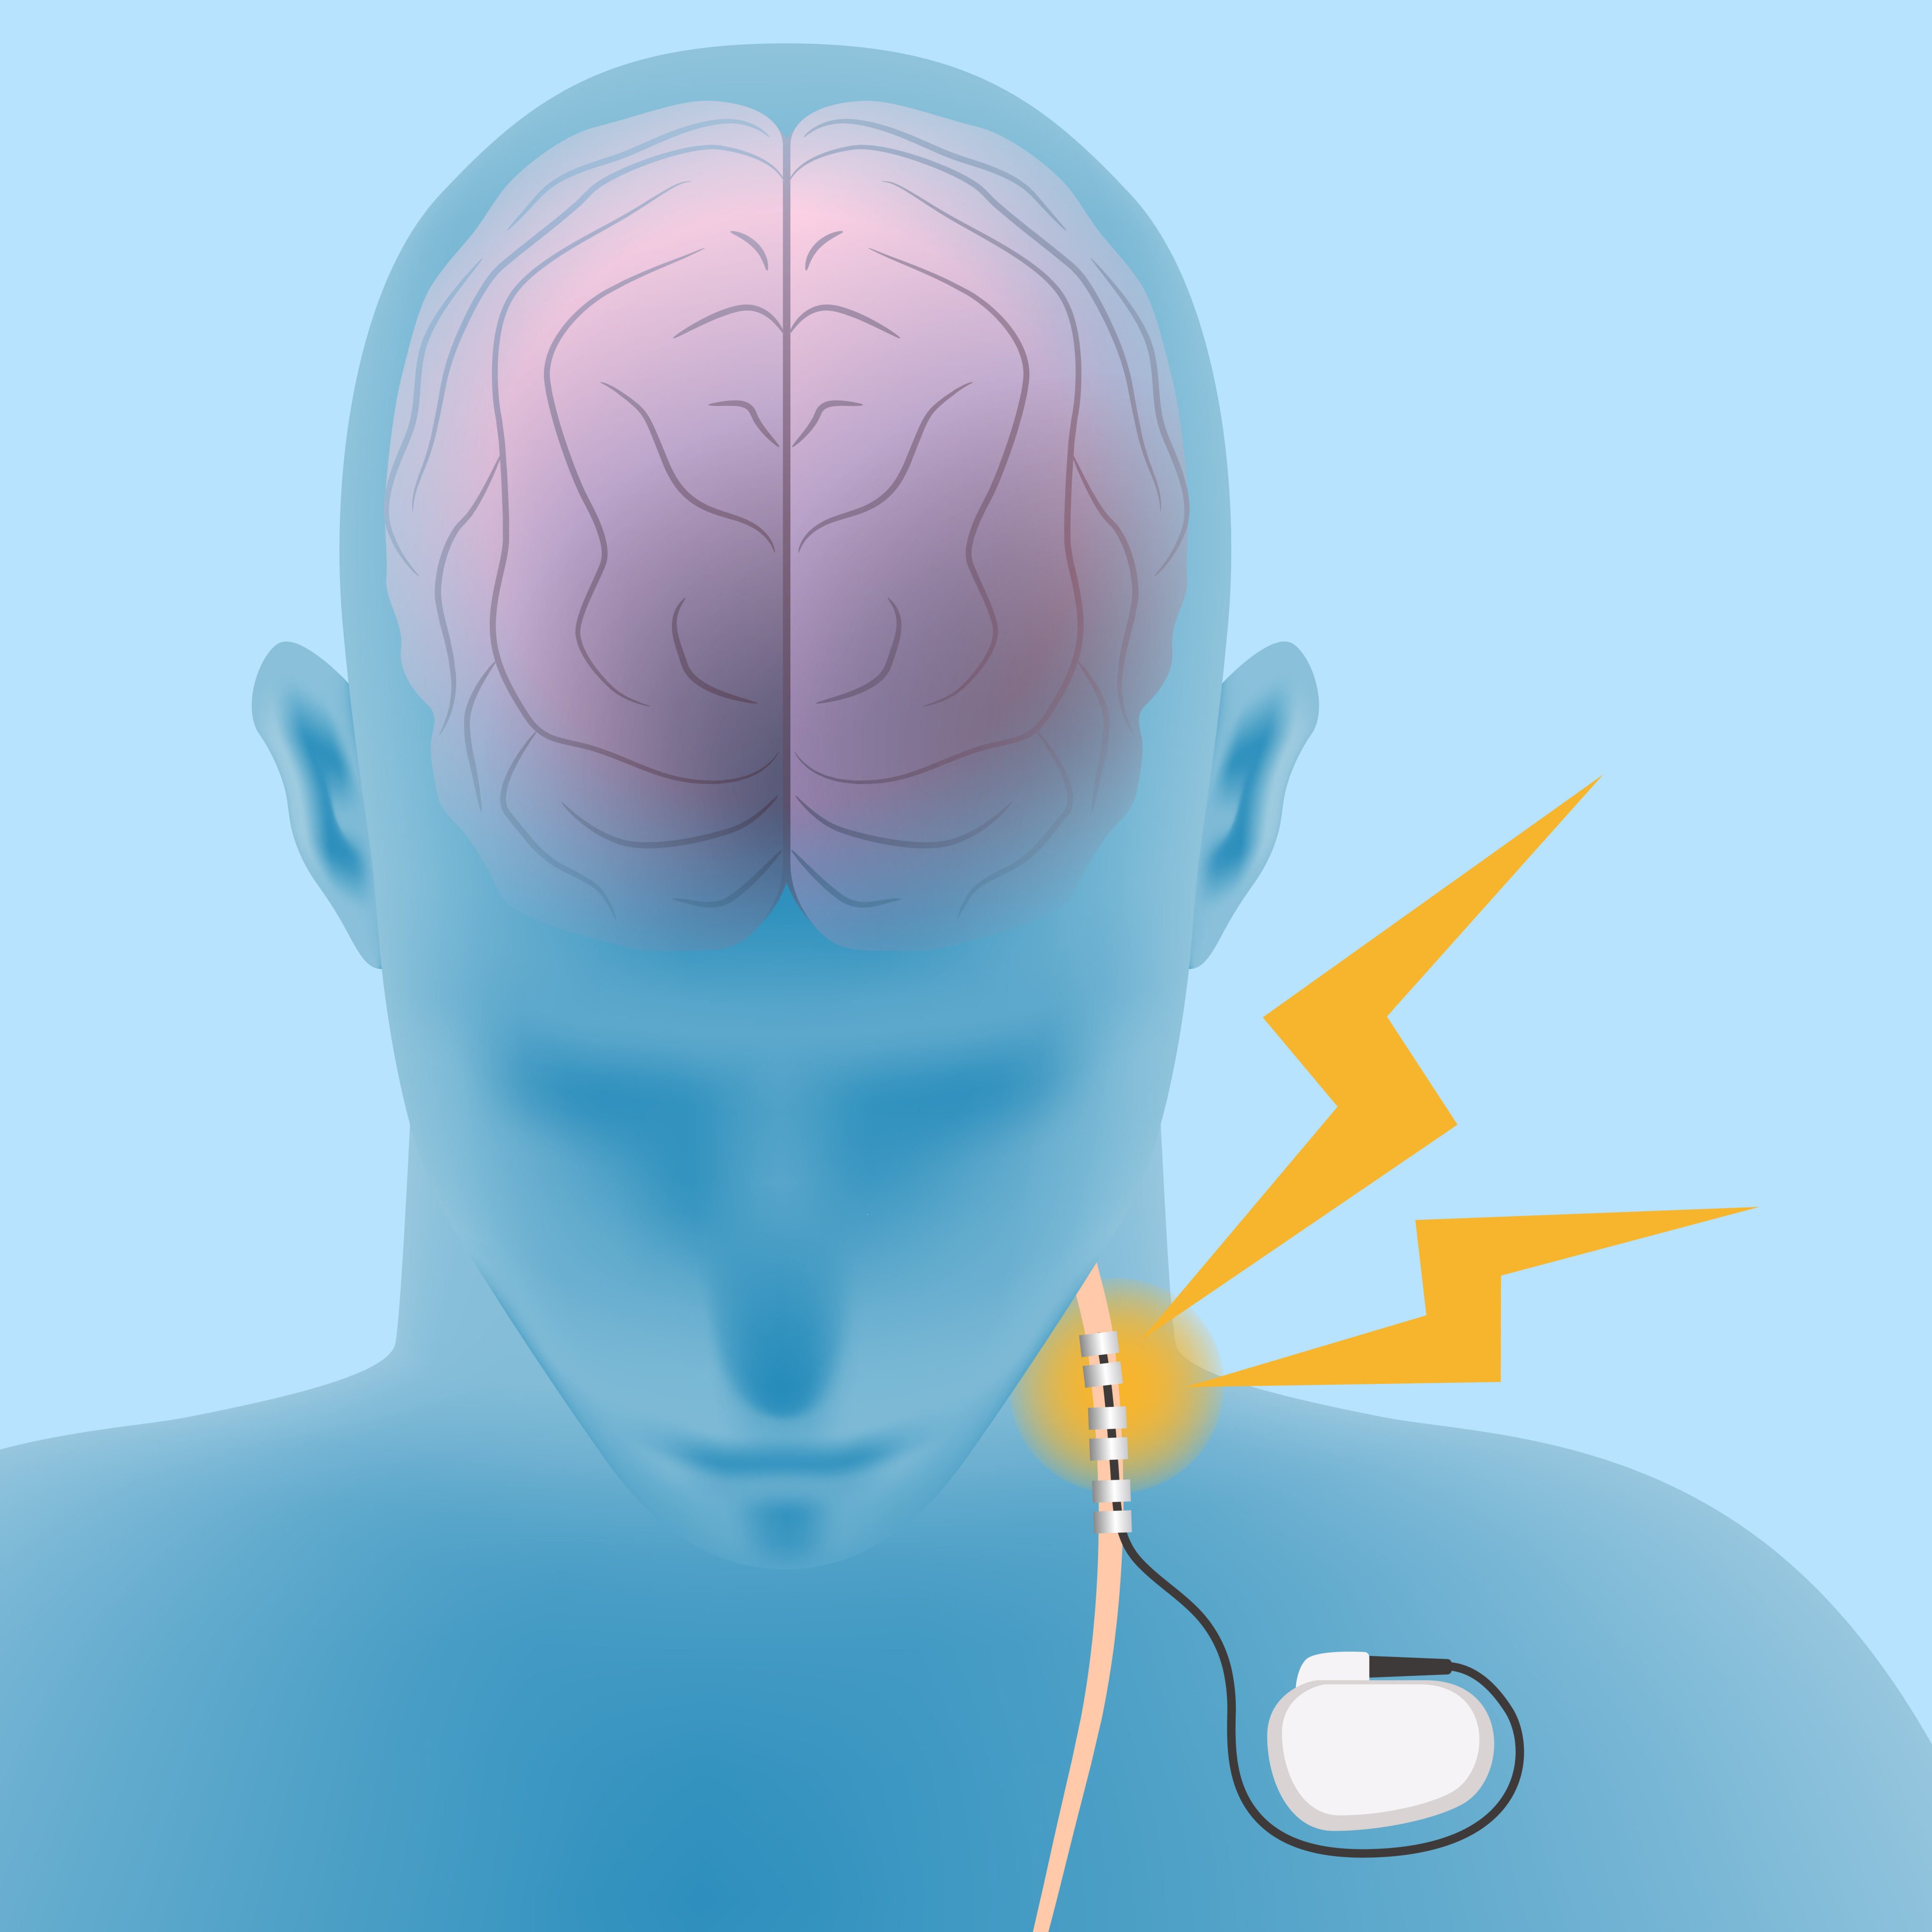 Invasive vagus nerve stimulation (VNS) uses a small device that is surgically implanted in the chest cavity near the collarbone to send electrical pulses to the vagus nerve which transmits those pulses to the brain.
Illustration: Shutterstock